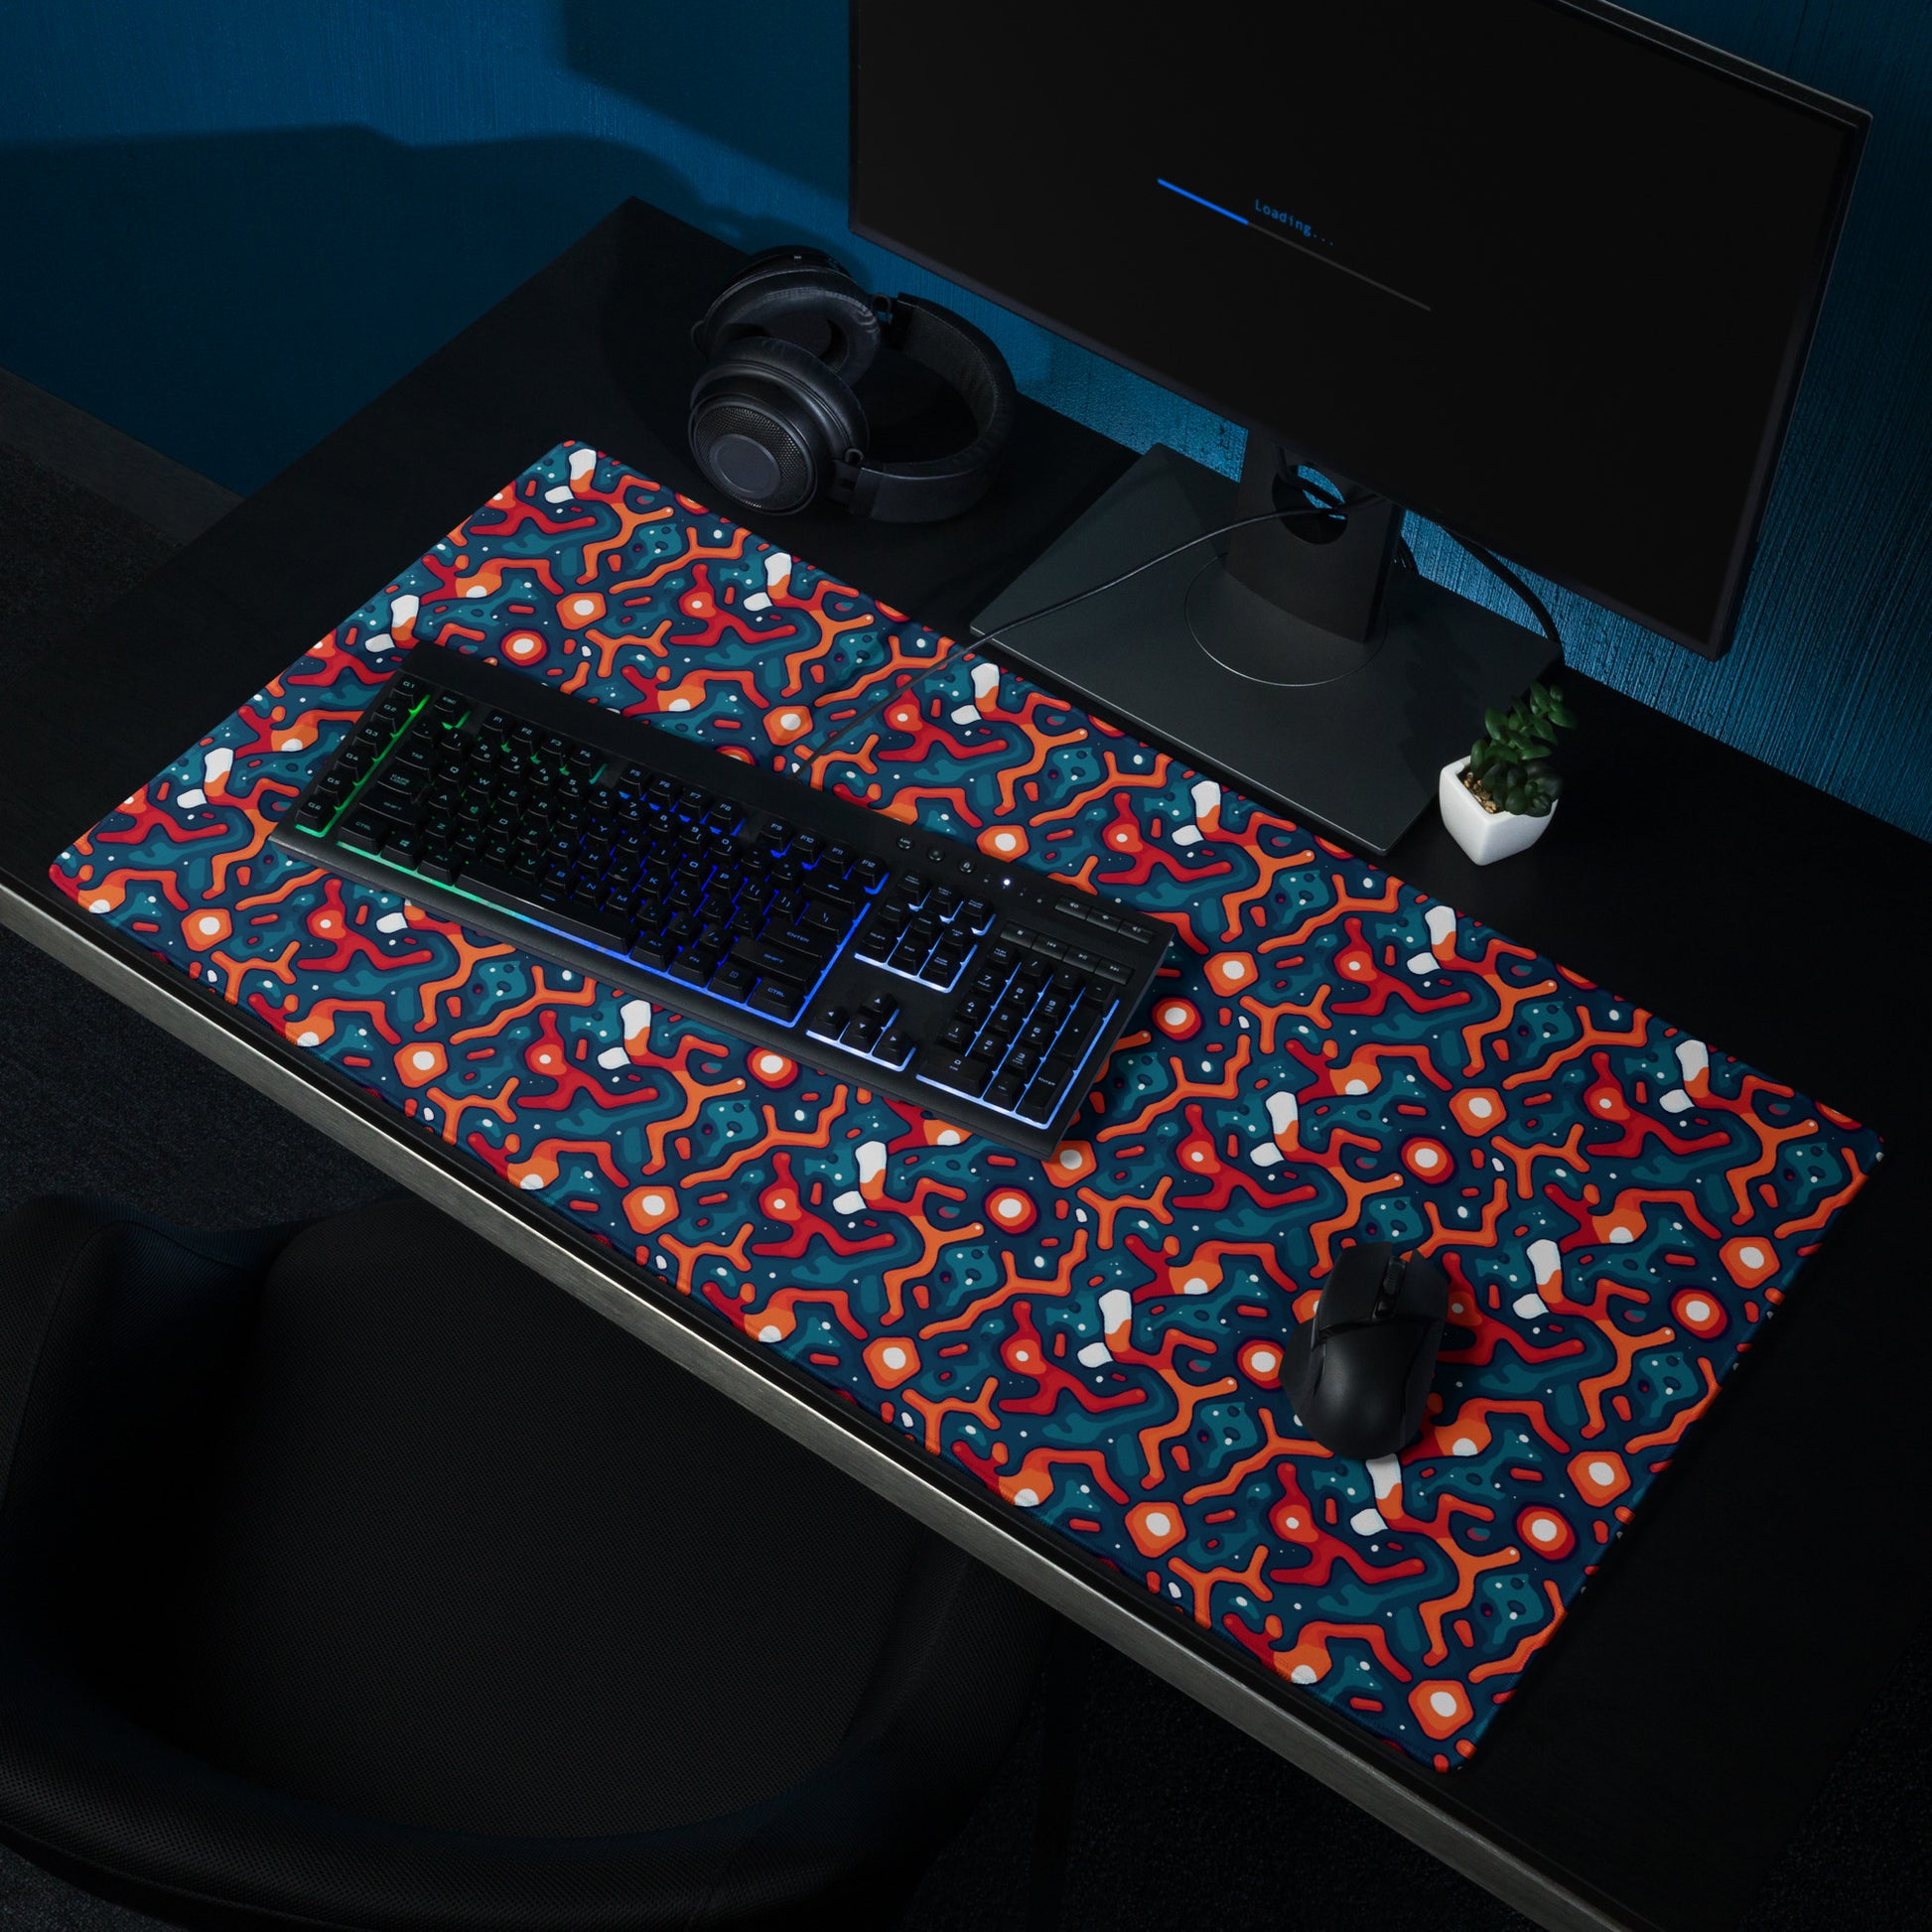 A 36" x 18" desk pad with a blue and orange crack pattern sitting on a desk.